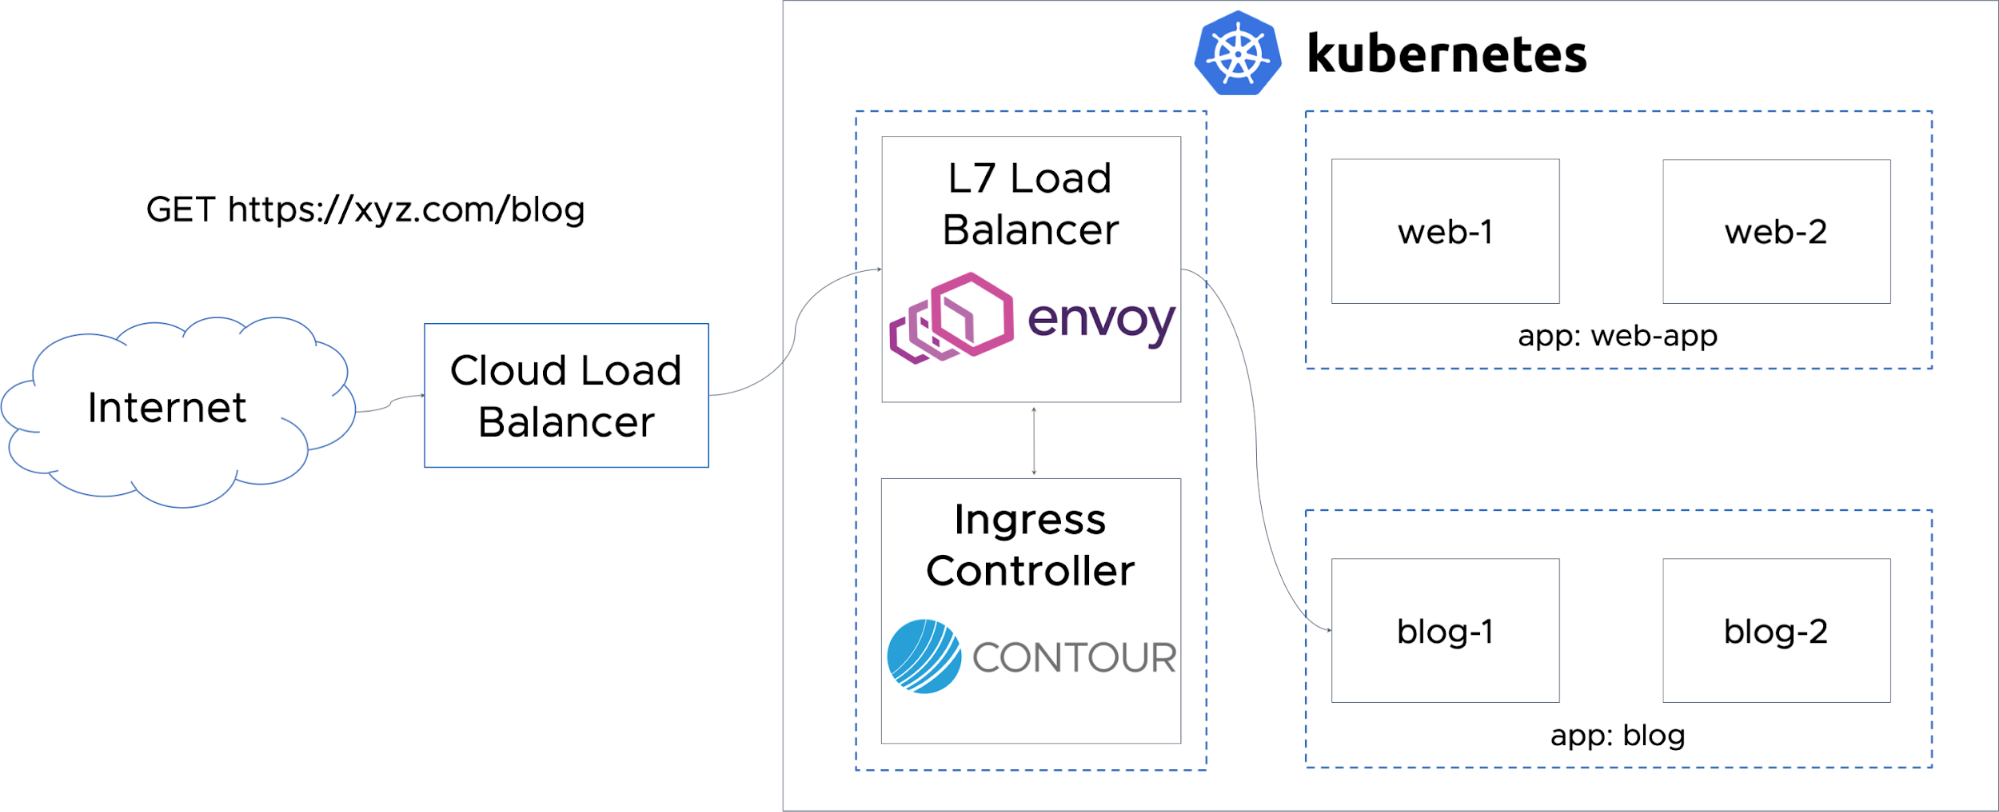 Routing Traffic to Applications in Kubernetes with Contour